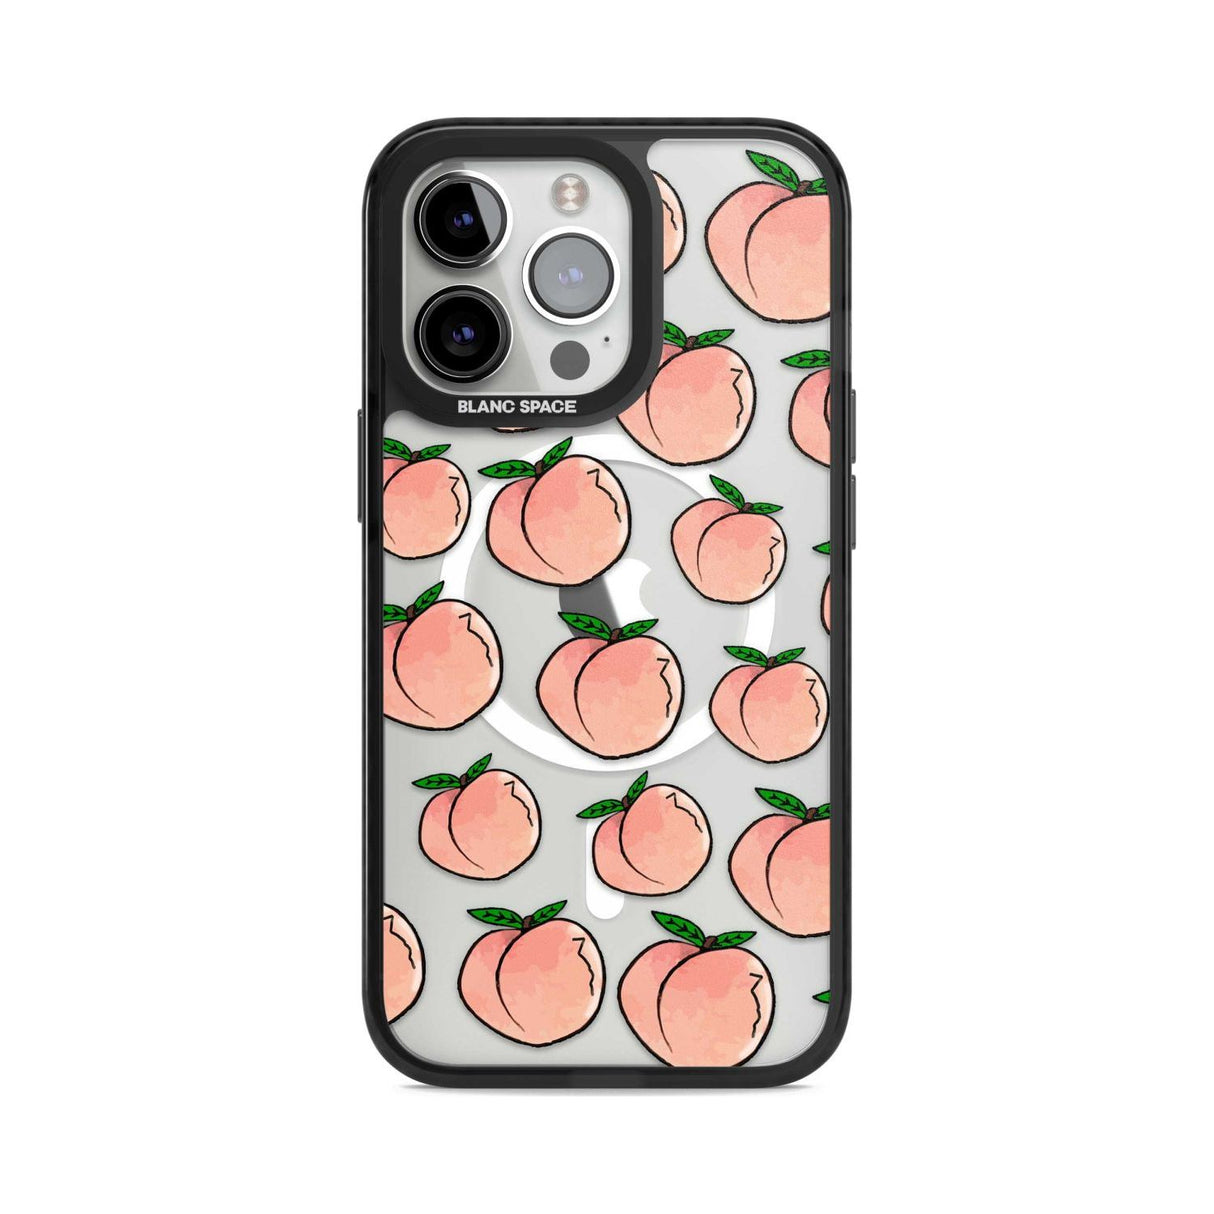 Life's a Peach Phone Case iPhone 15 Pro / Magsafe Black Impact Case,iPhone 15 Pro Max / Magsafe Black Impact Case,iPhone 14 Pro Max / Magsafe Black Impact Case,iPhone 14 Pro / Magsafe Black Impact Case,iPhone 13 Pro / Magsafe Black Impact Case,iPhone 15 Ultra / Magsafe Black Impact Case Blanc Space